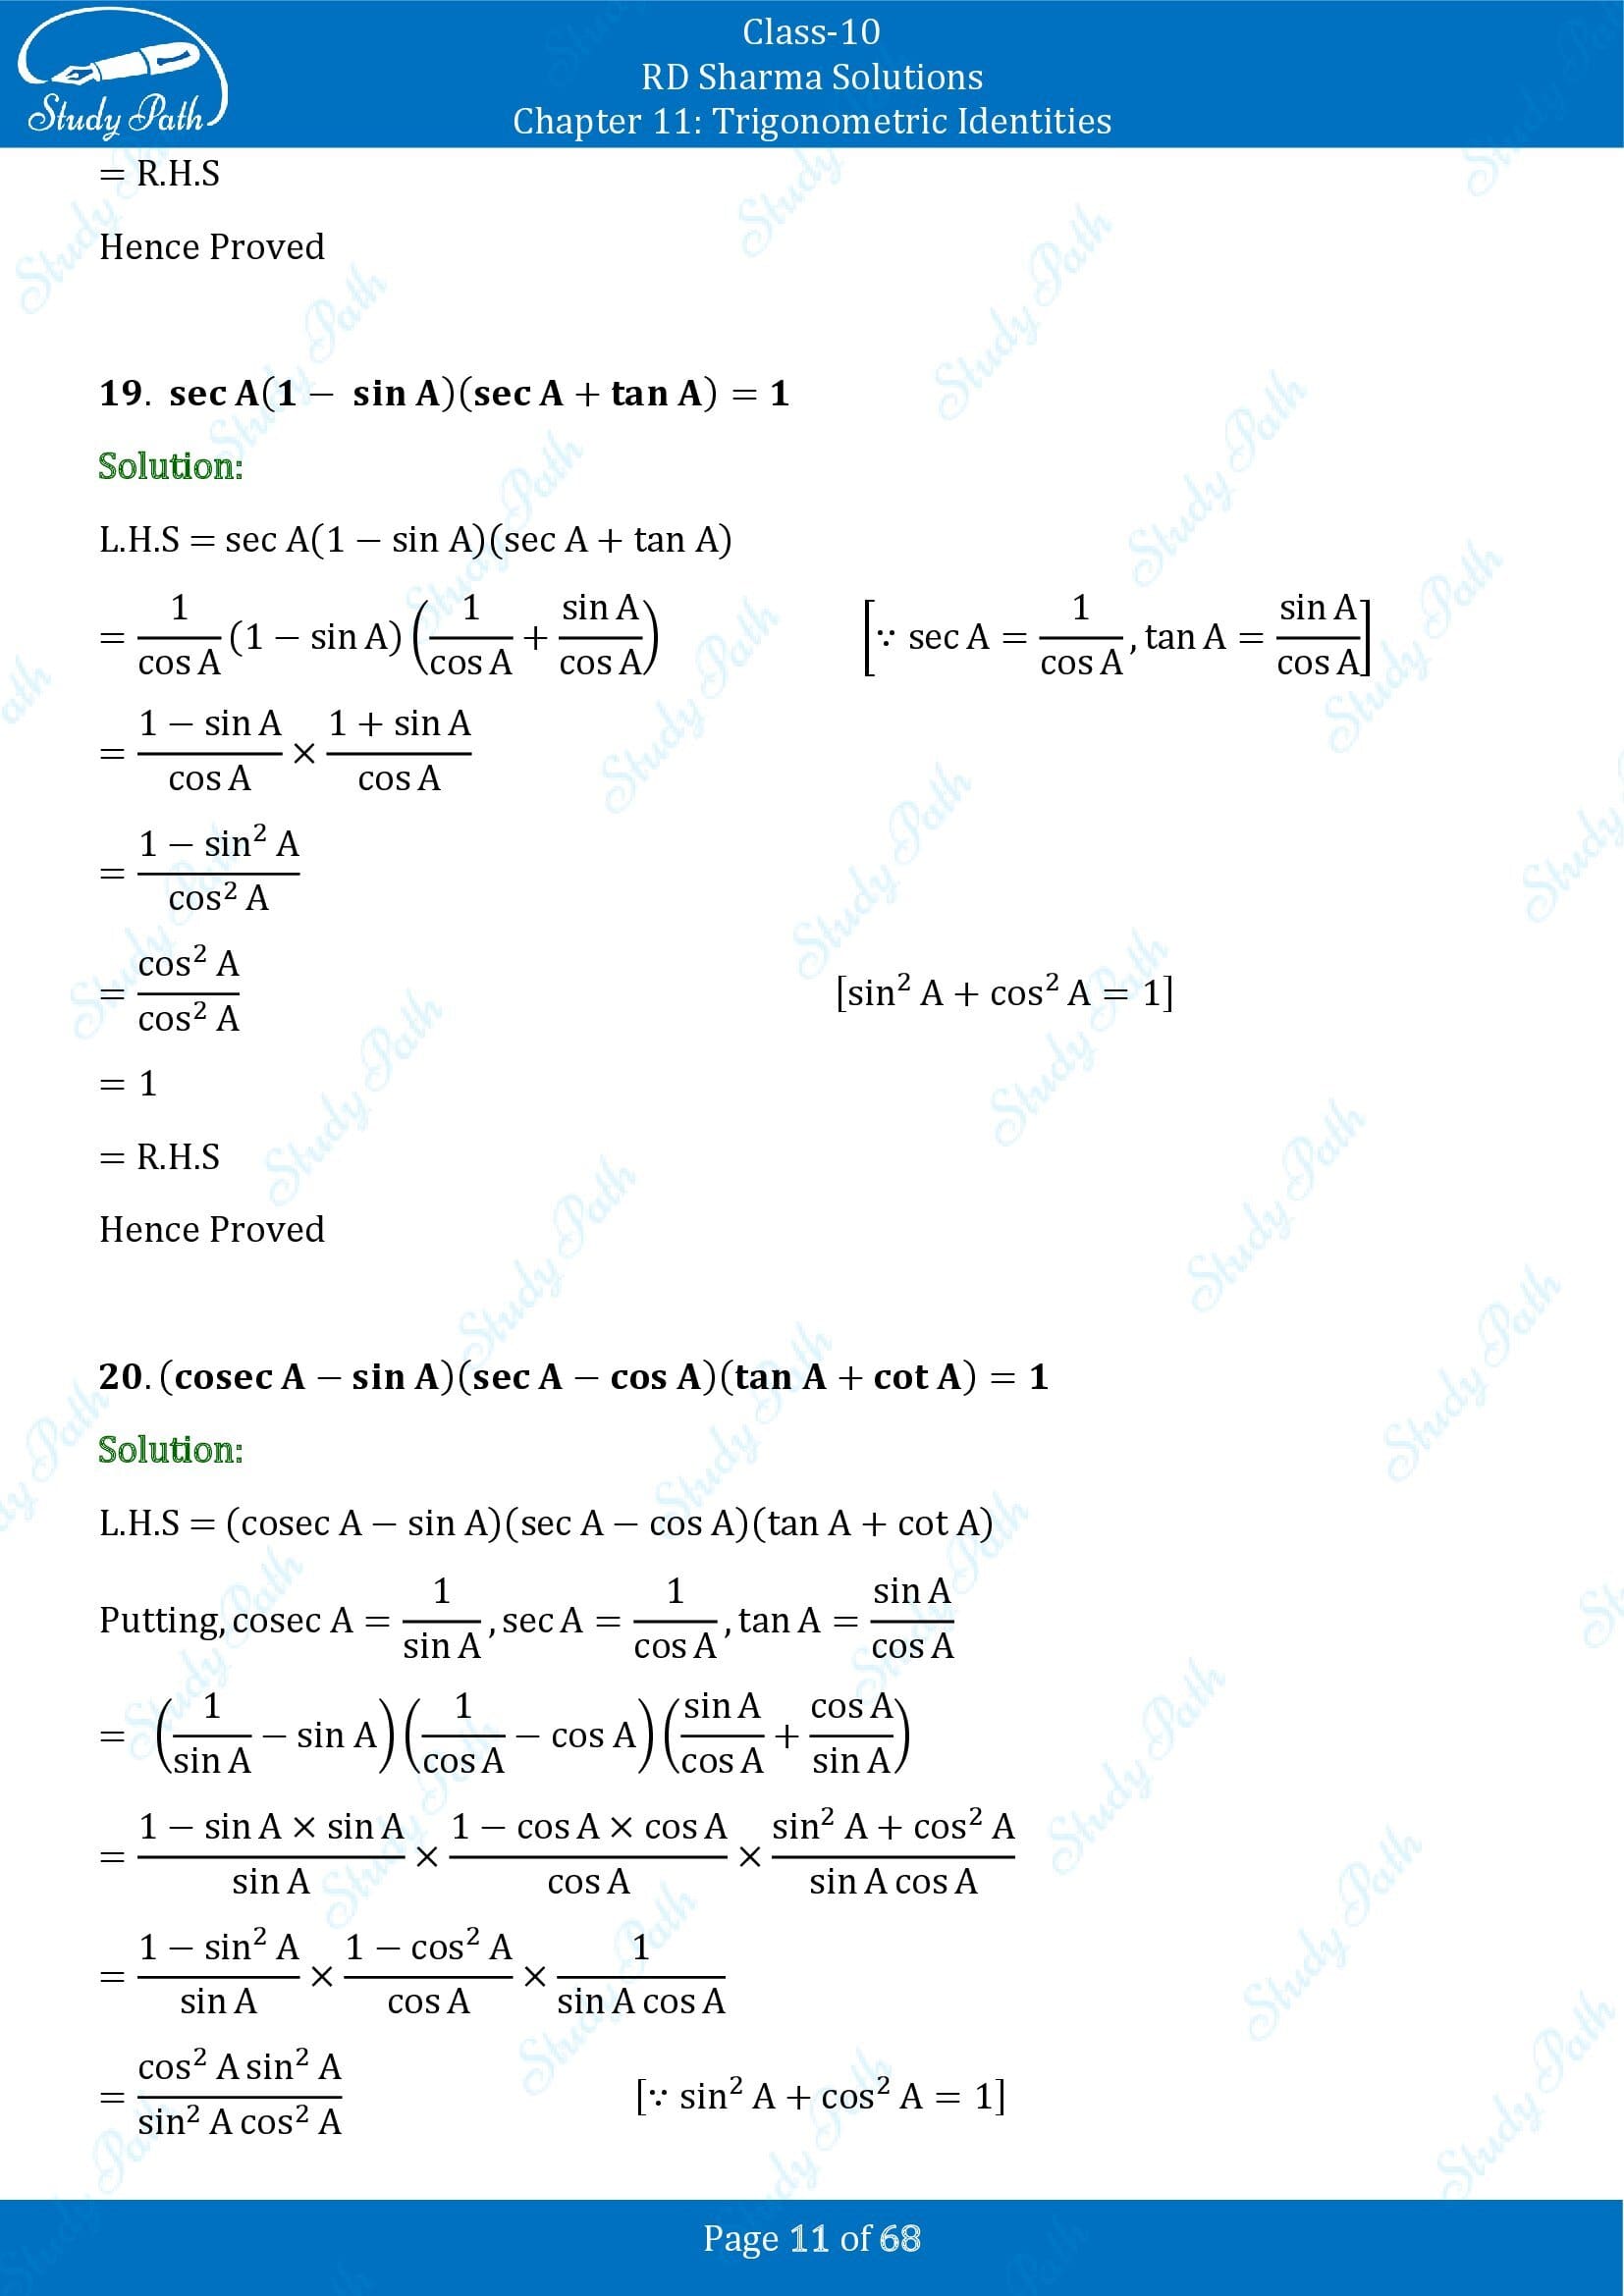 RD Sharma Solutions Class 10 Chapter 11 Trigonometric Identities Exercise 11.1 00011